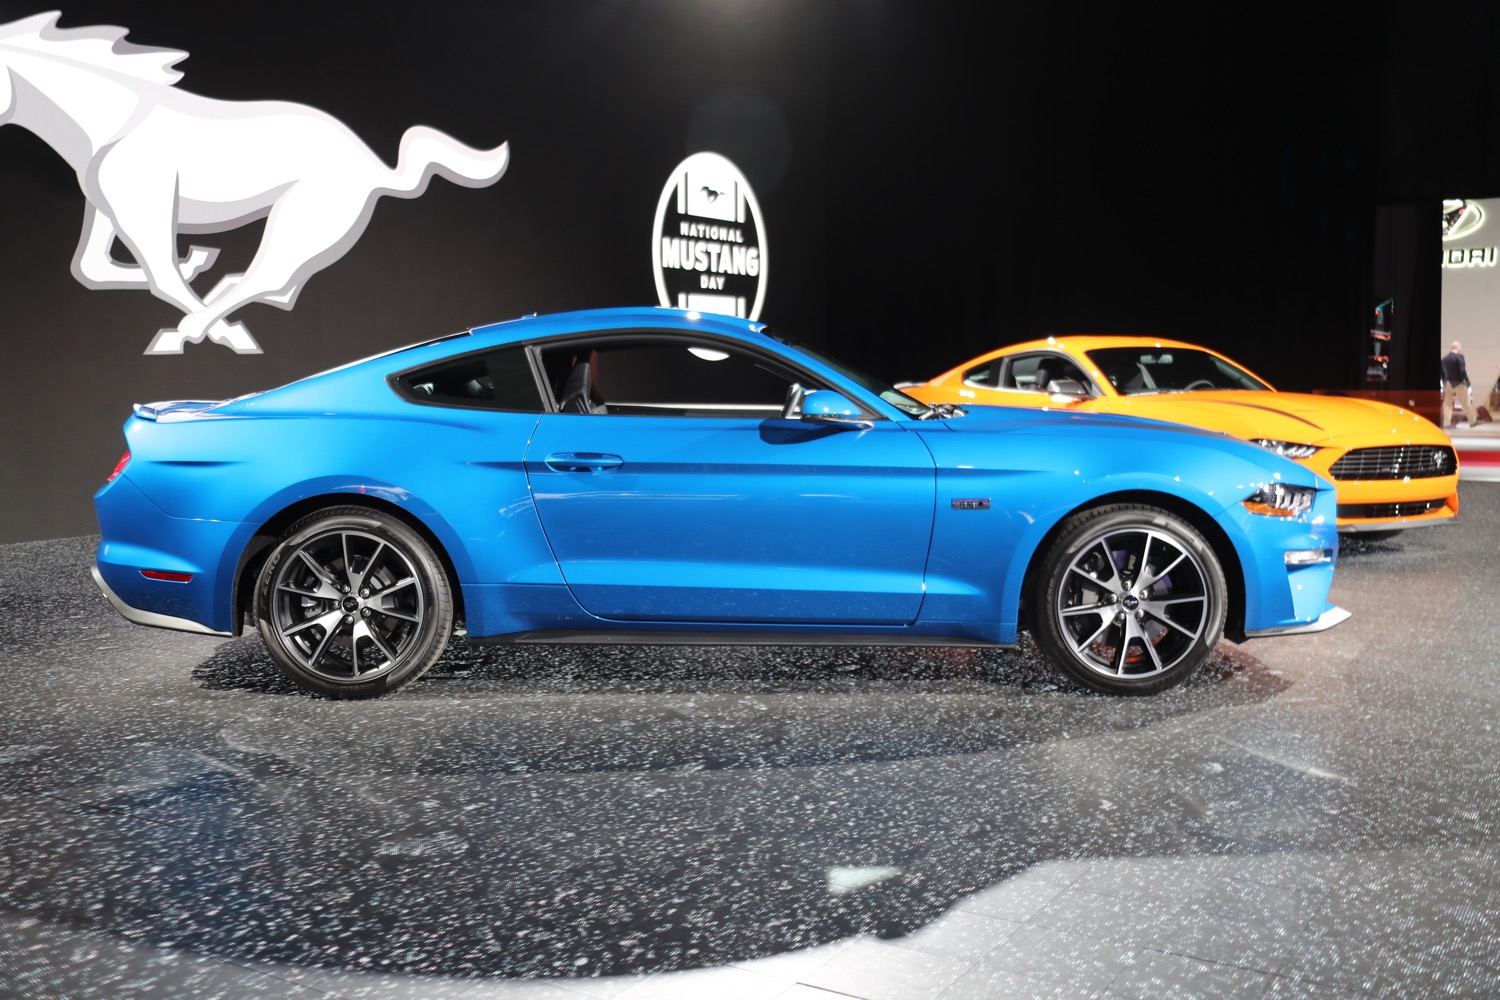 2020 Mustang Gt Convertible Performance Package
